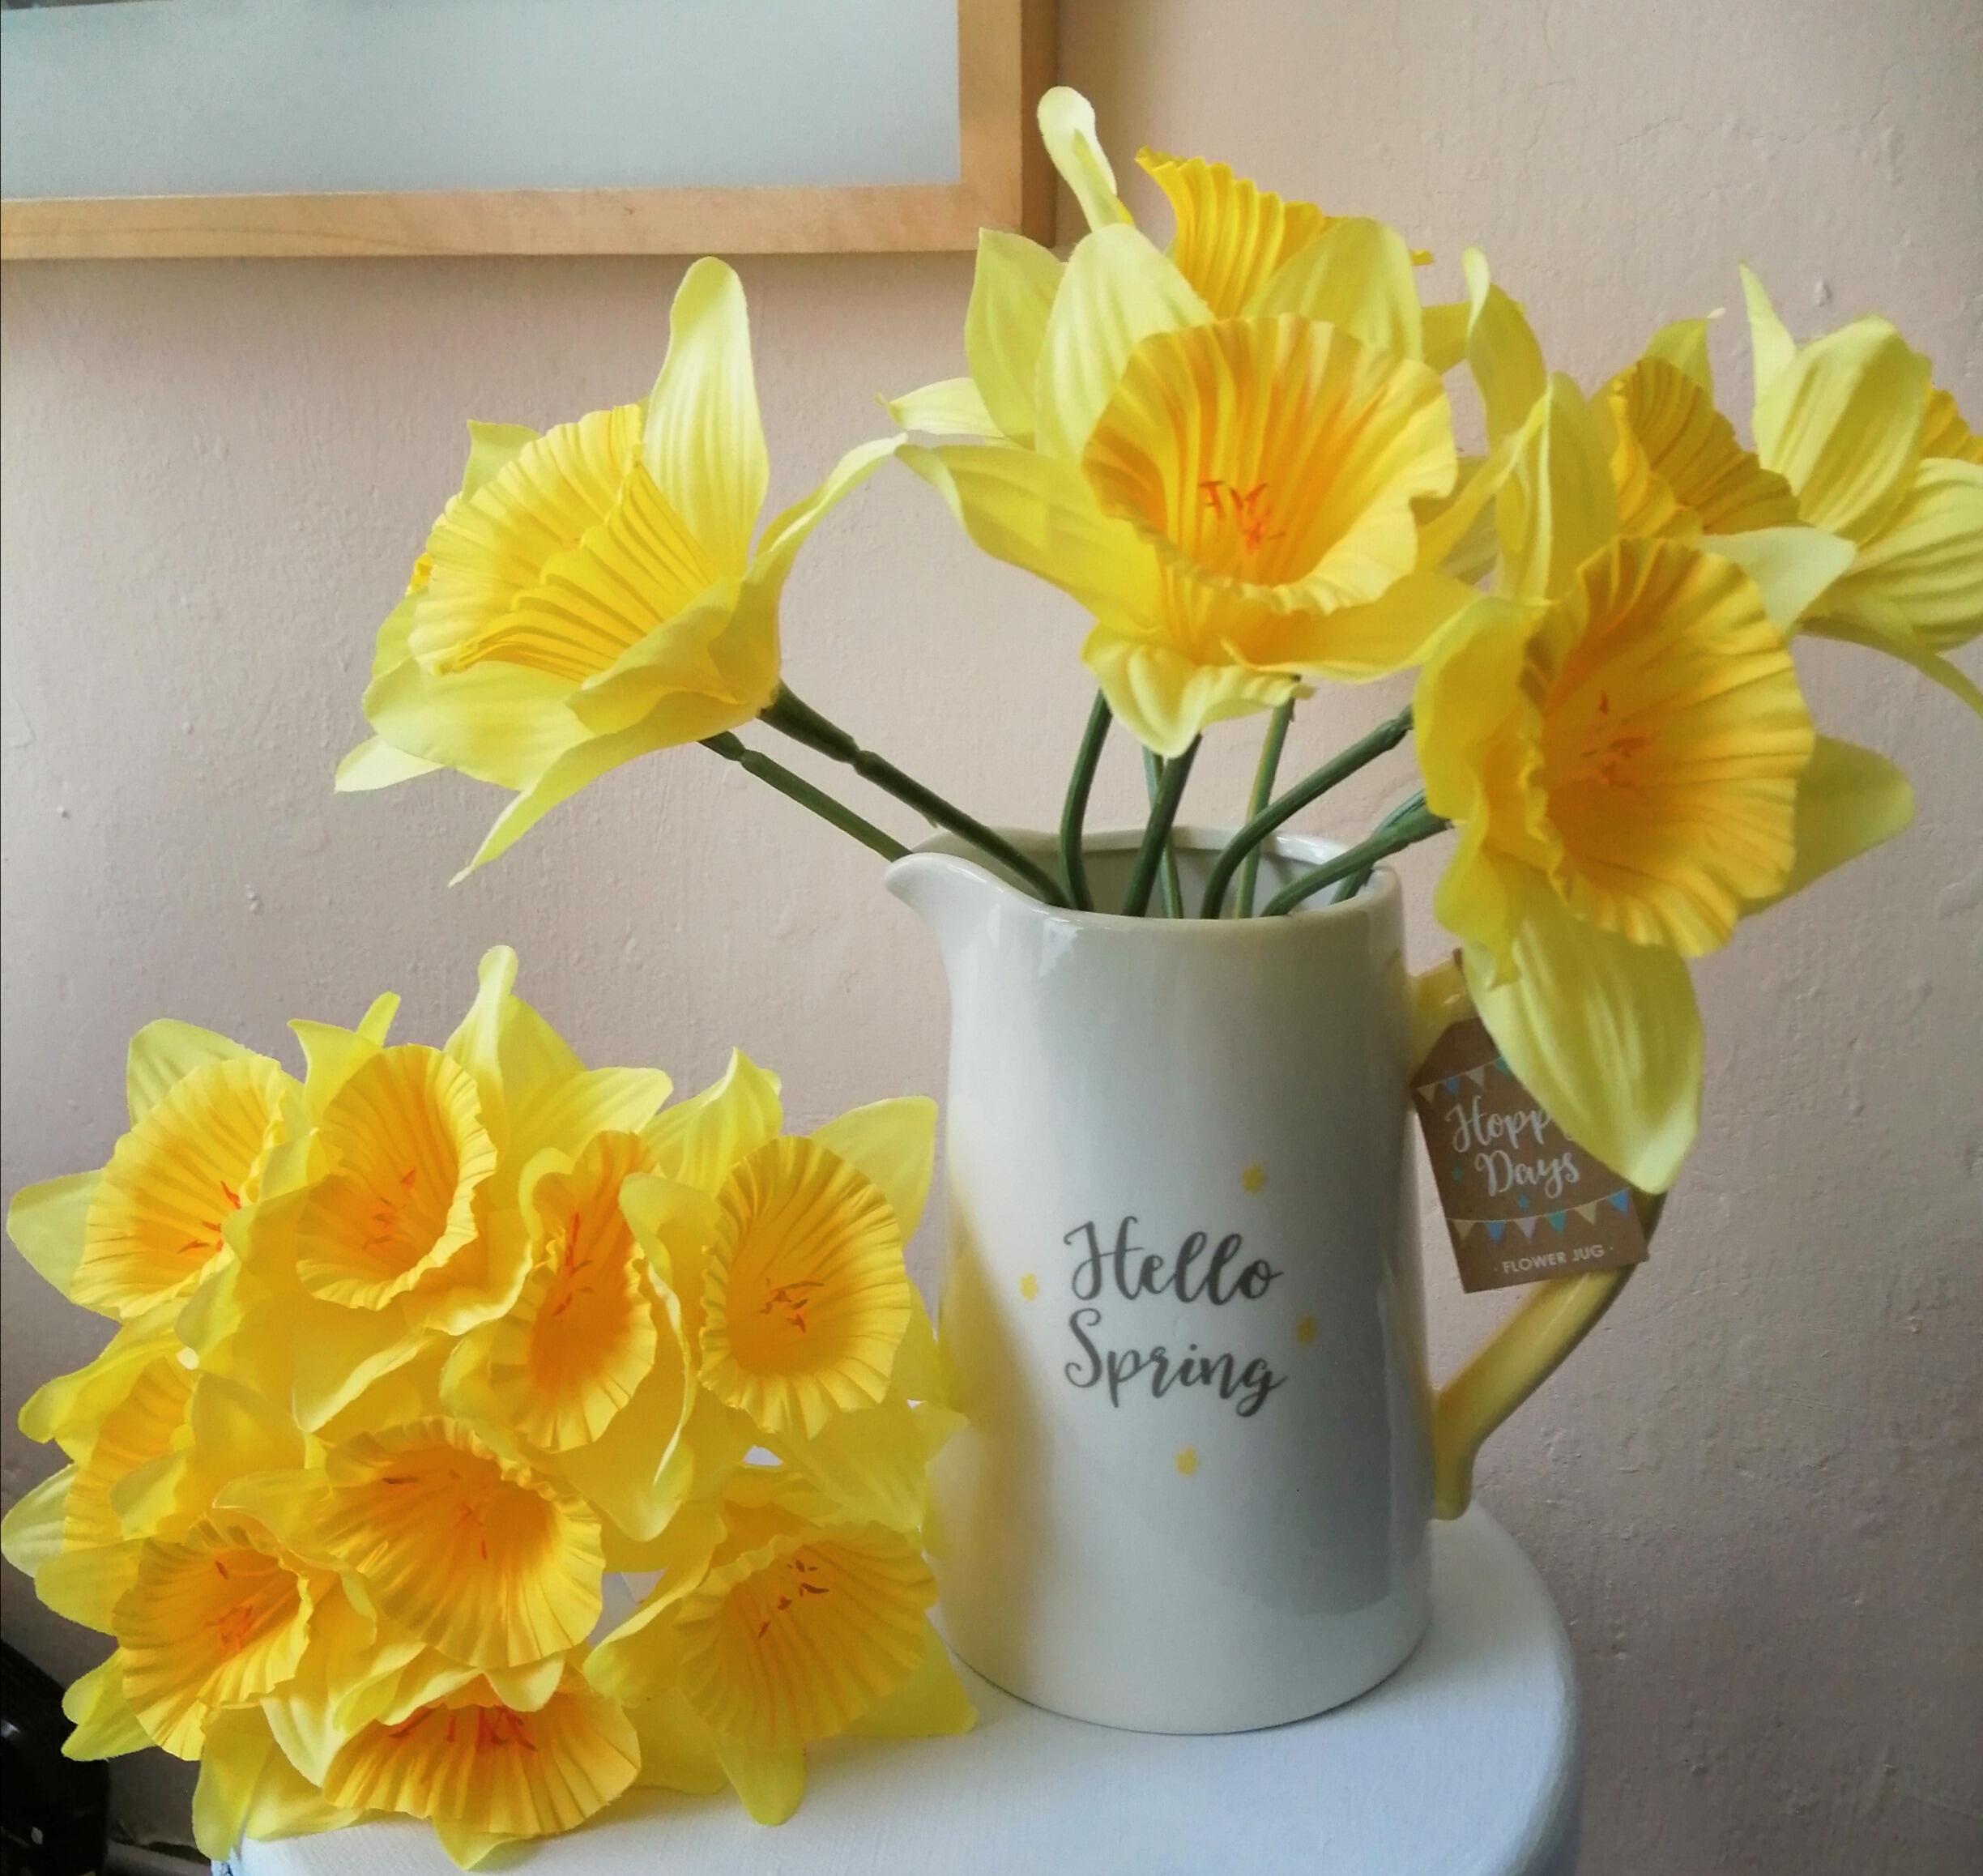 Bouquet of Daffodils